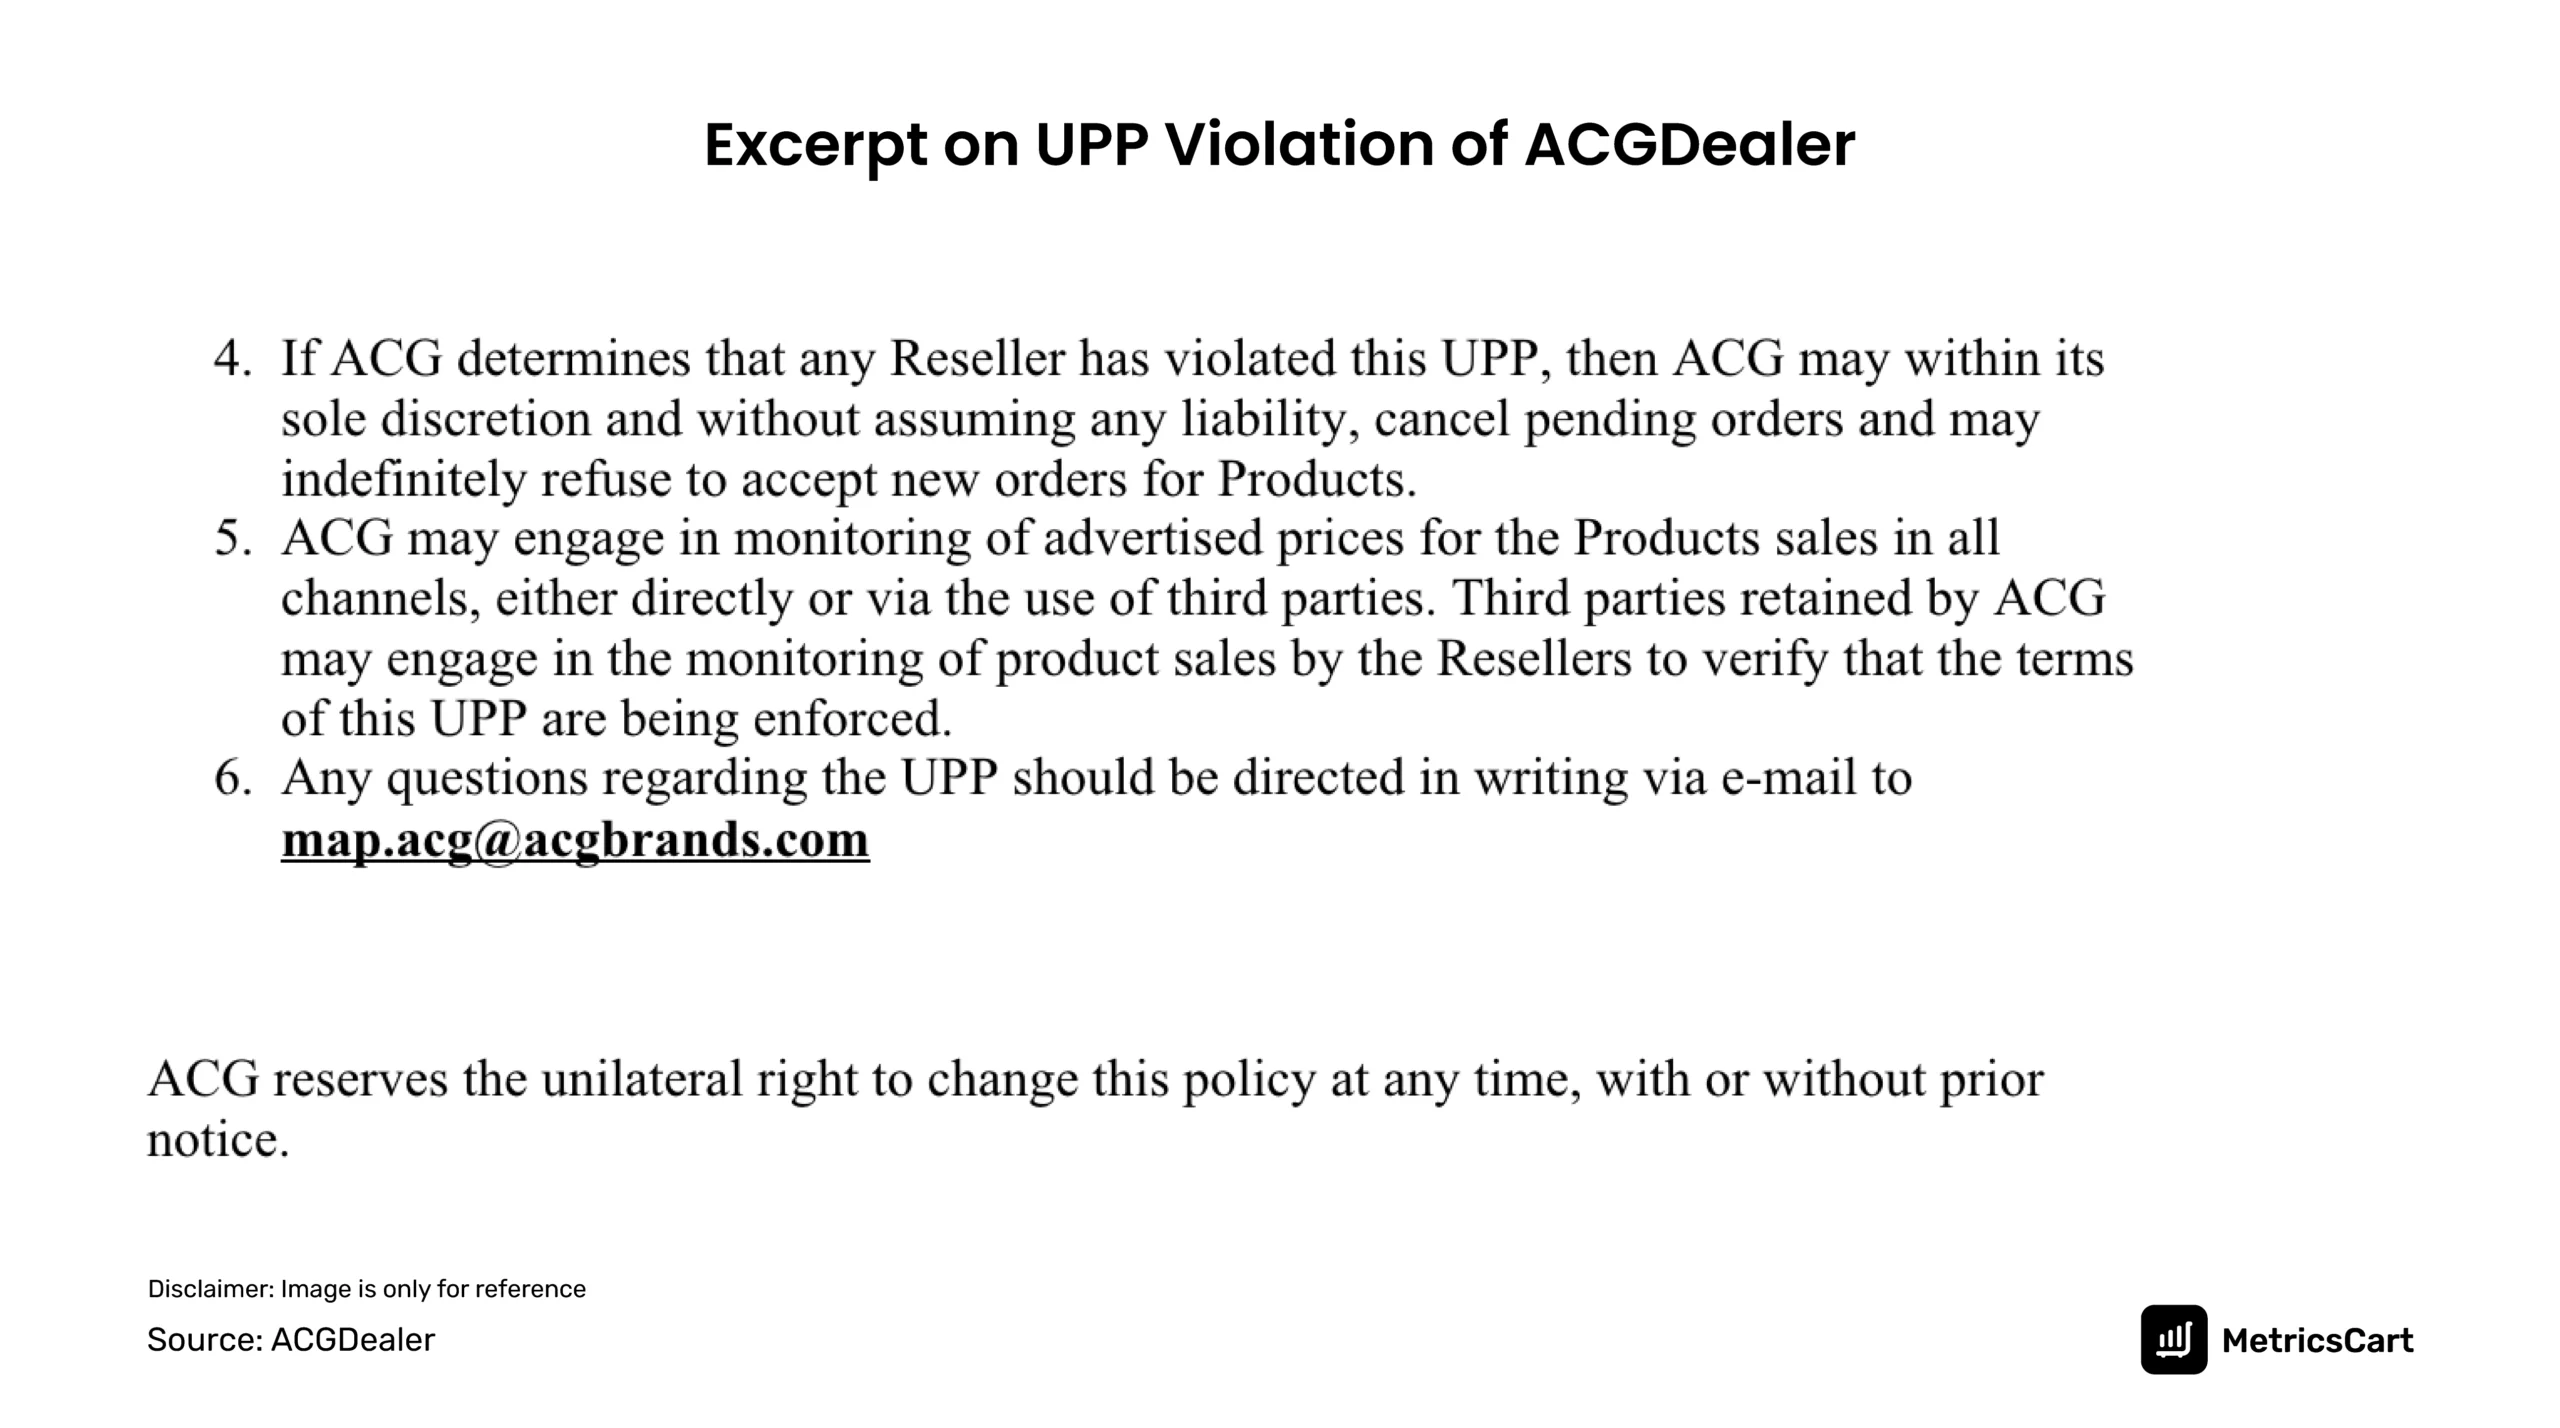 An excerpt from the Unilateral Pricing Policy of ACGDealer